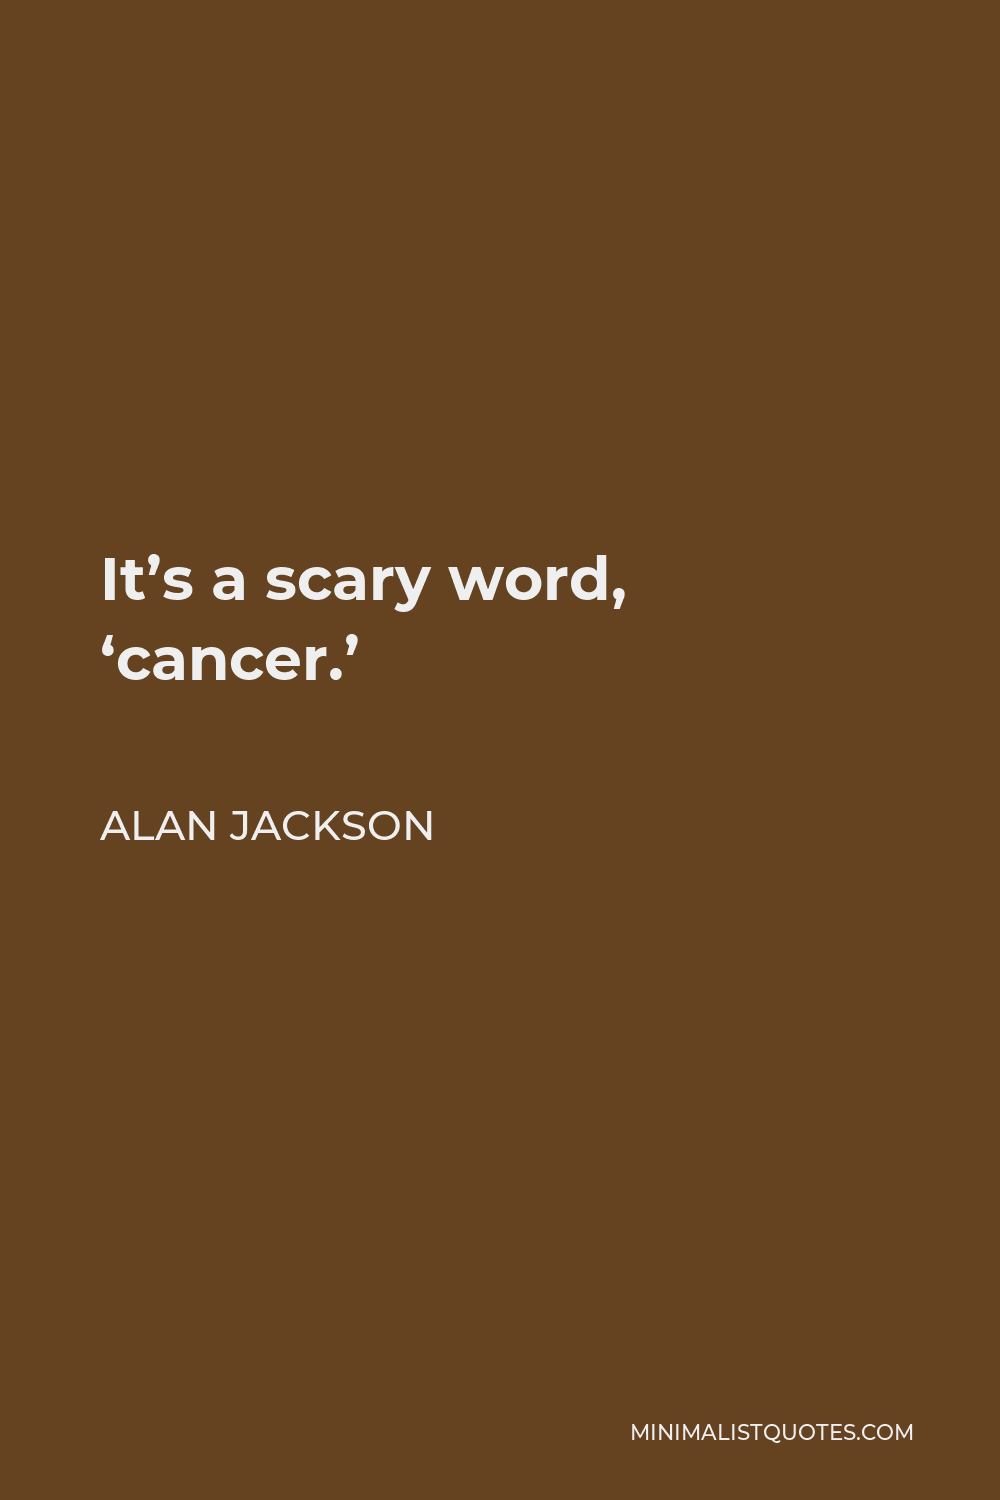 Alan Jackson Quote - It’s a scary word, ‘cancer.’